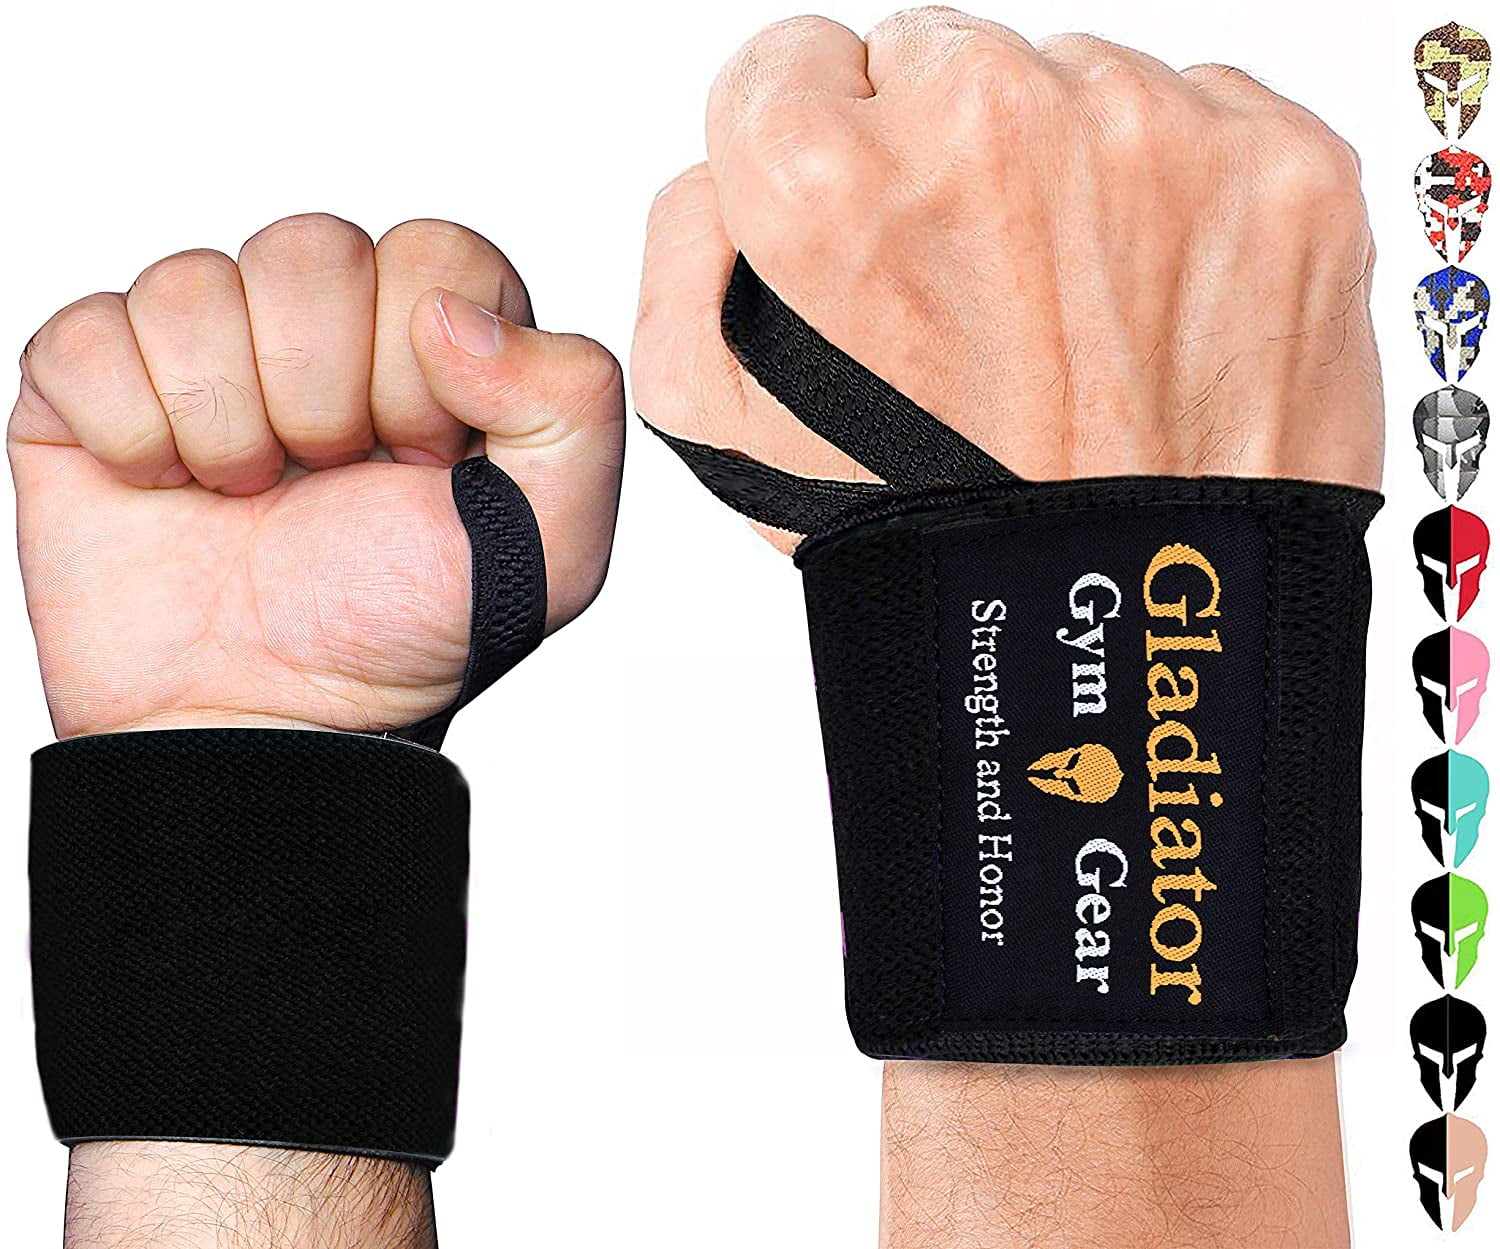 Fitness Padded Weight Lifting Training Gym Straps Hand Bar Wrist Wraps